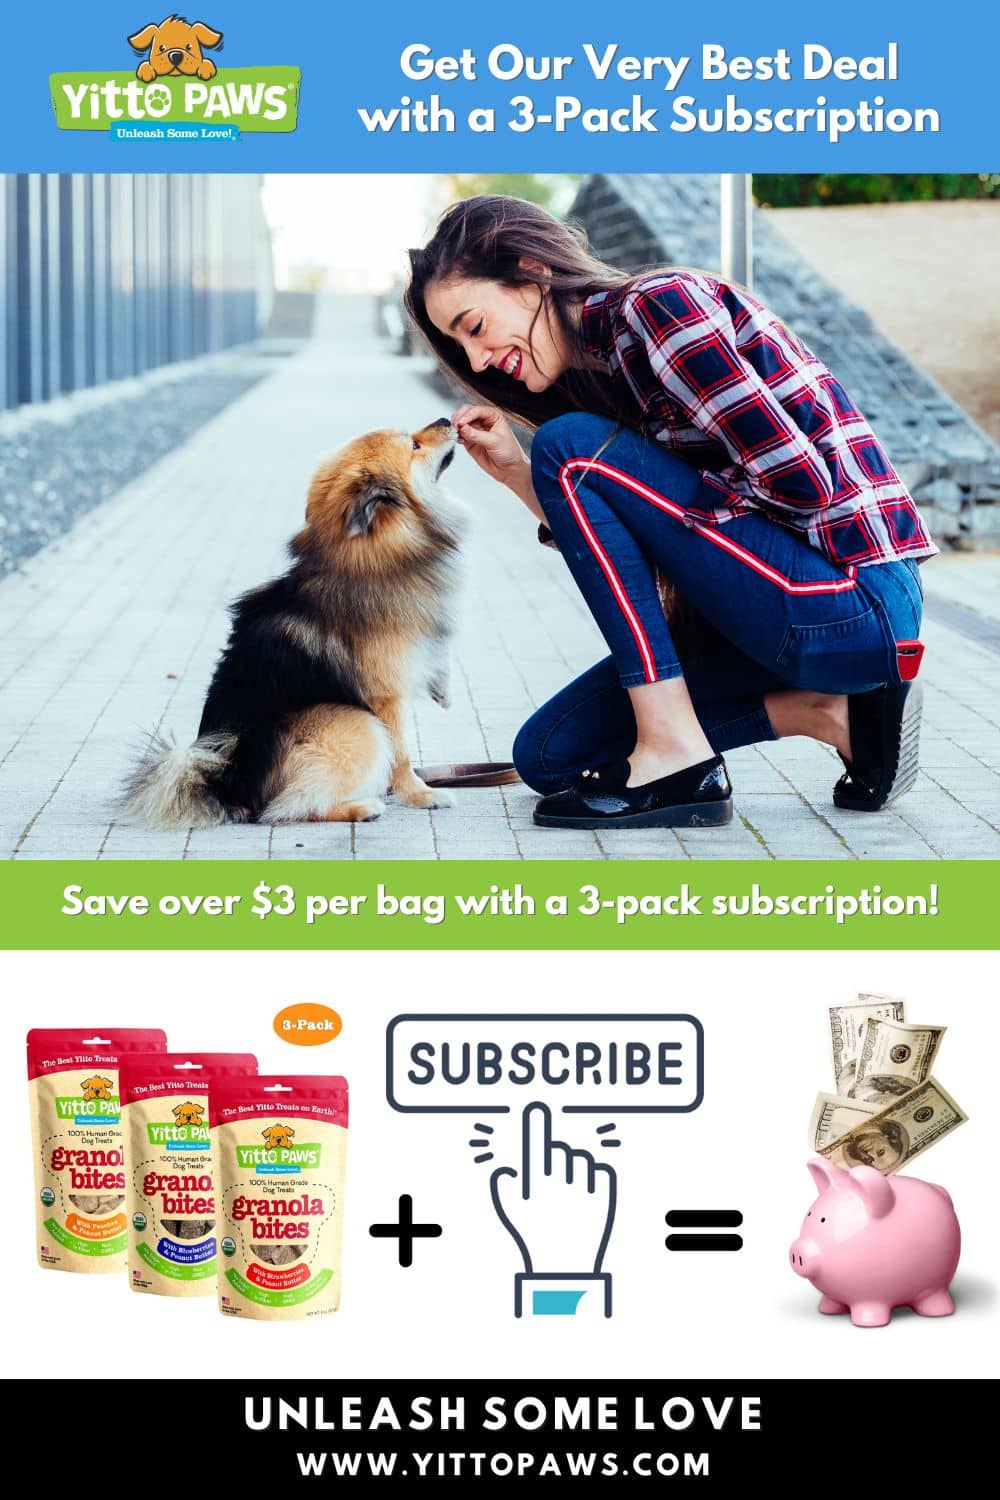 Get Our Best Deal with a 3-Pack Subscription of Yitto Paws organic dog treats!